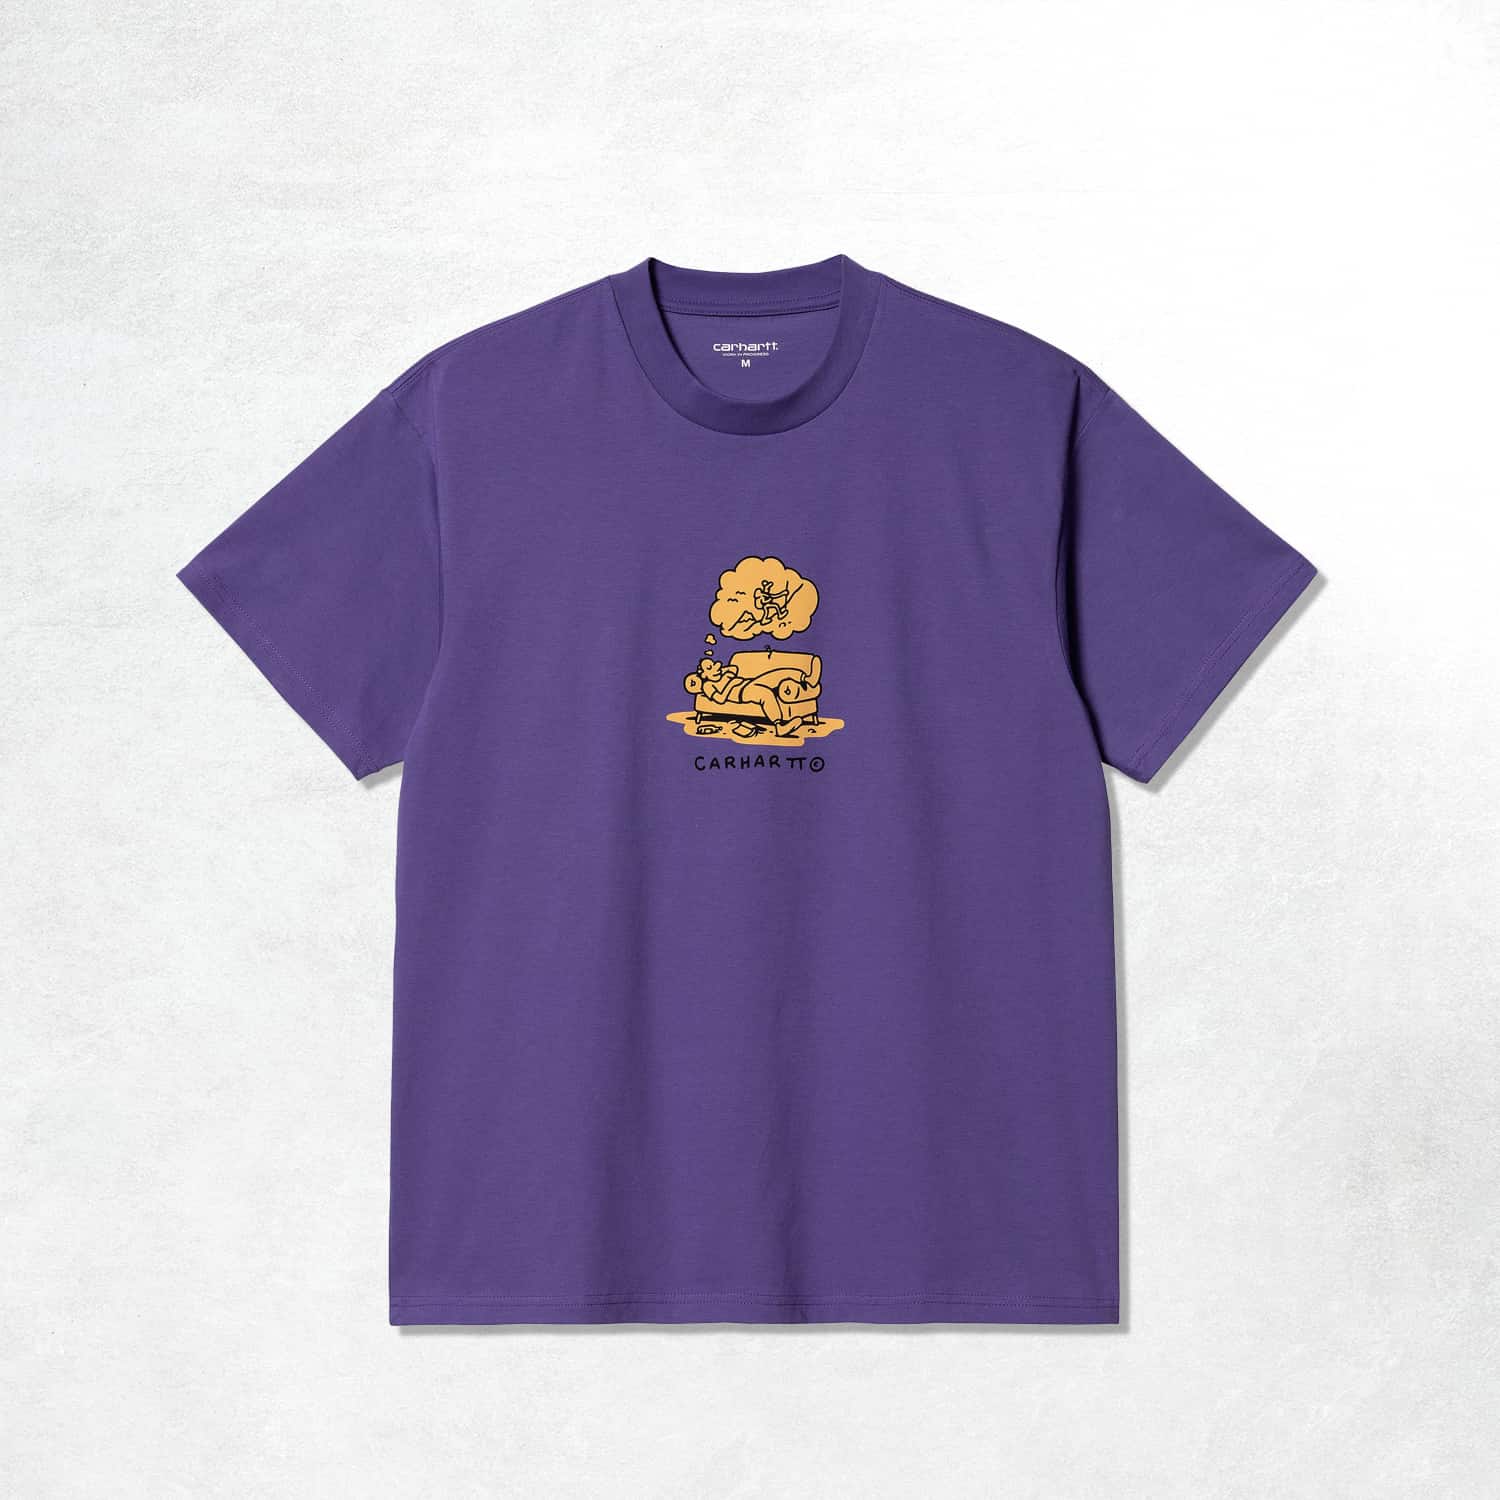 Carhartt WIP S/S Other Side T-Shirt: Arrenga (Front)